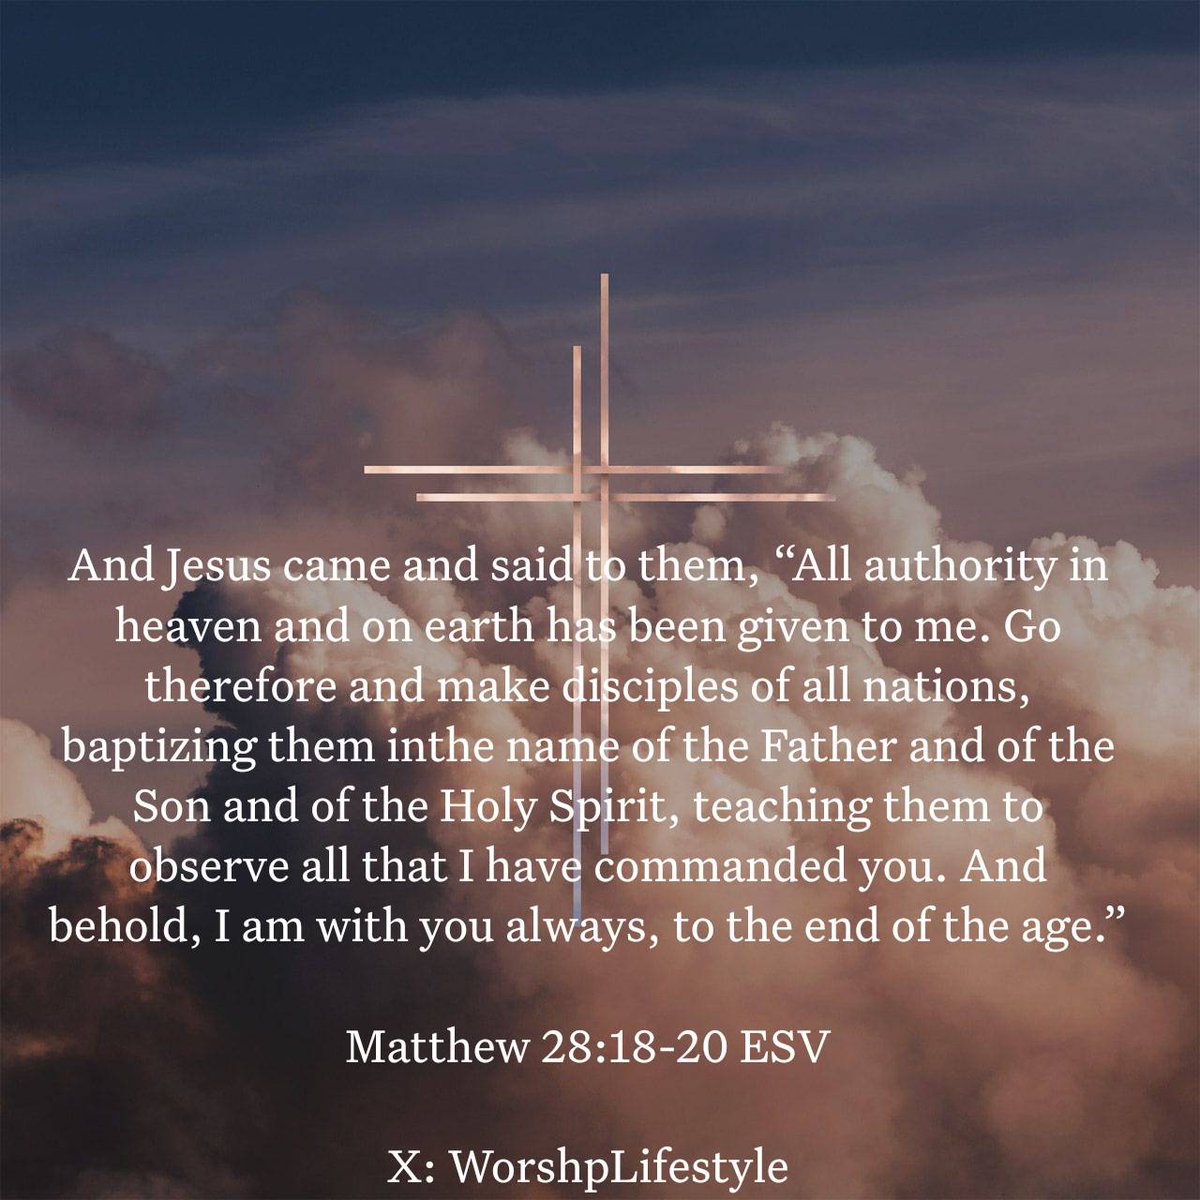 Matthew 28:18-20
...Go therefore & make disciples of all nations, baptizing them in the name of the Father & of the Son & of the Holy Spirit, teaching them to observe all that I have commanded you. & behold, I am with you always, to the end of the age.